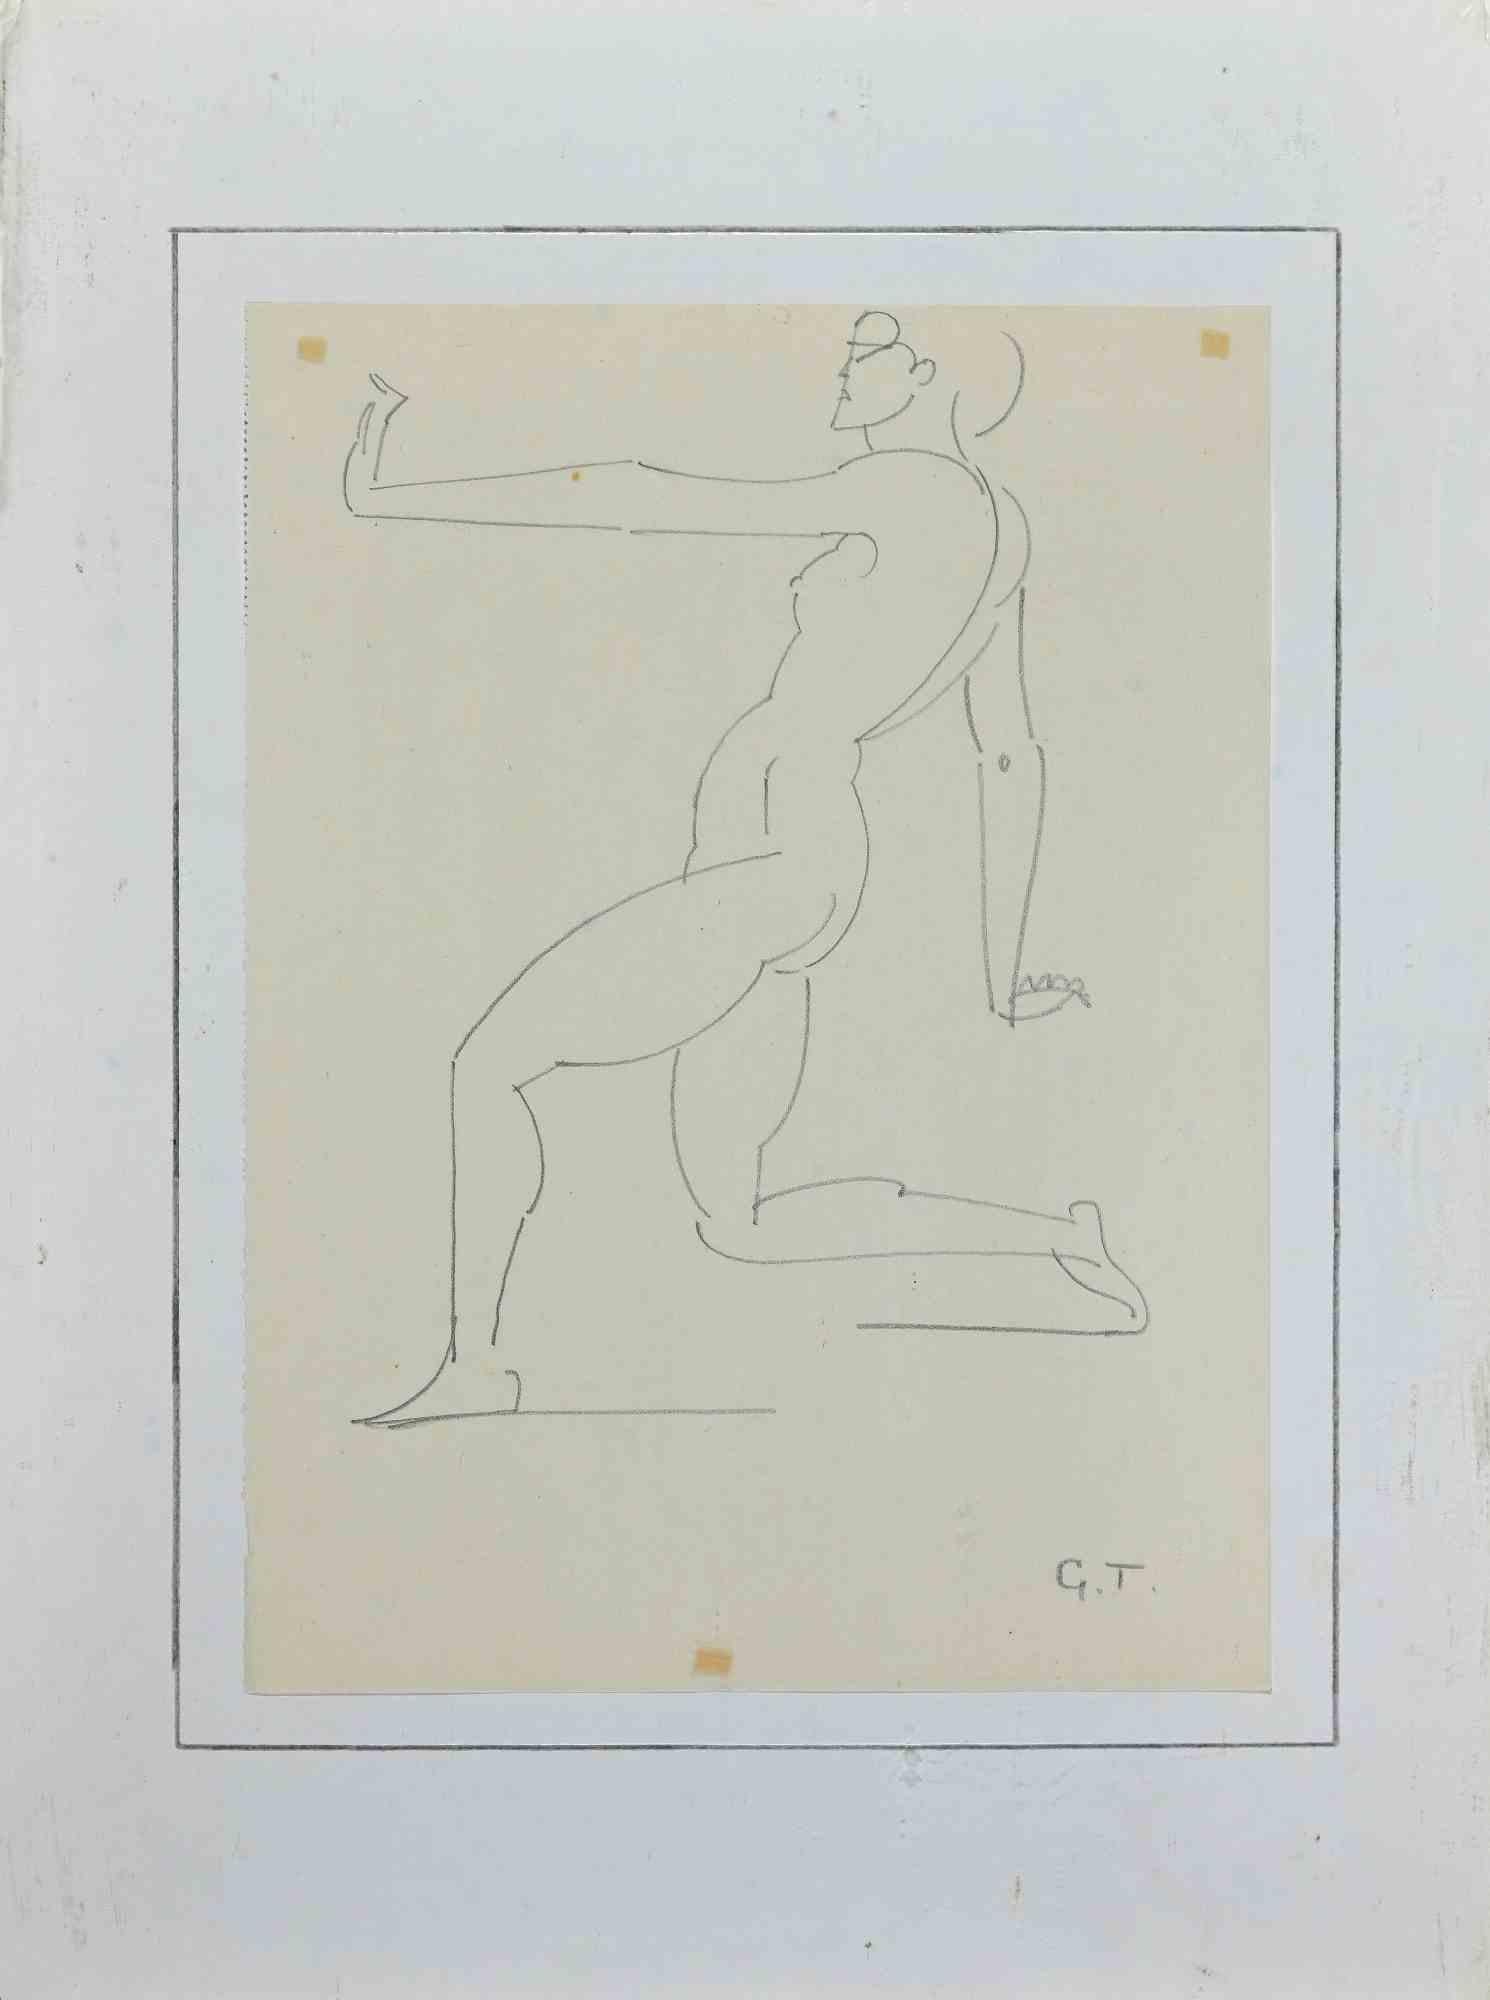 Georges-Henri Tribout Figurative Art - Posing  Nude - Pencil Drawing by George-Henri Tribout - 1950